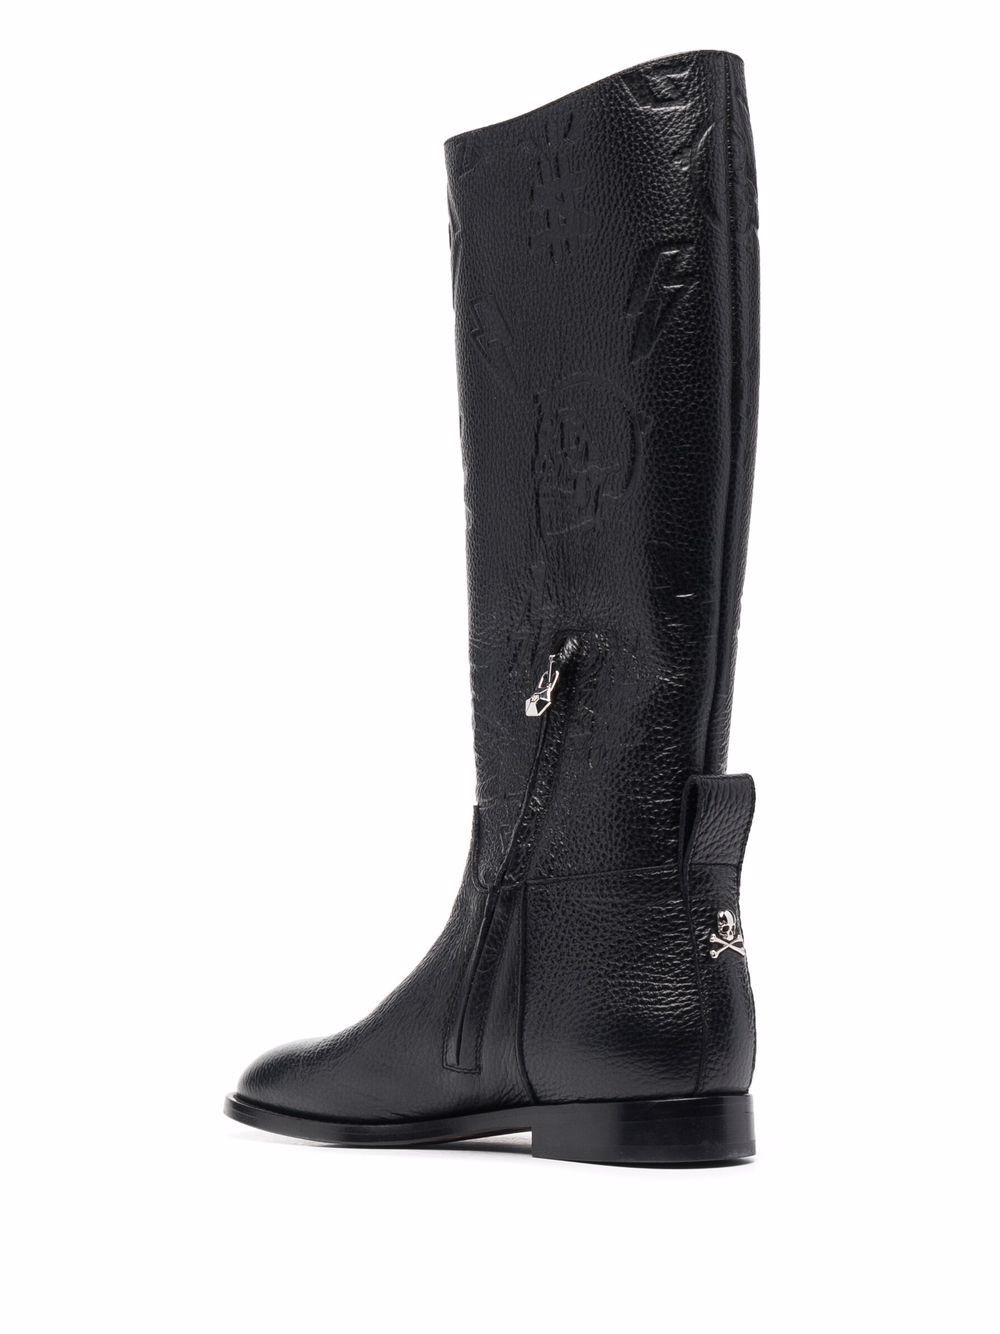 embossed-logo knee-high boots - 3